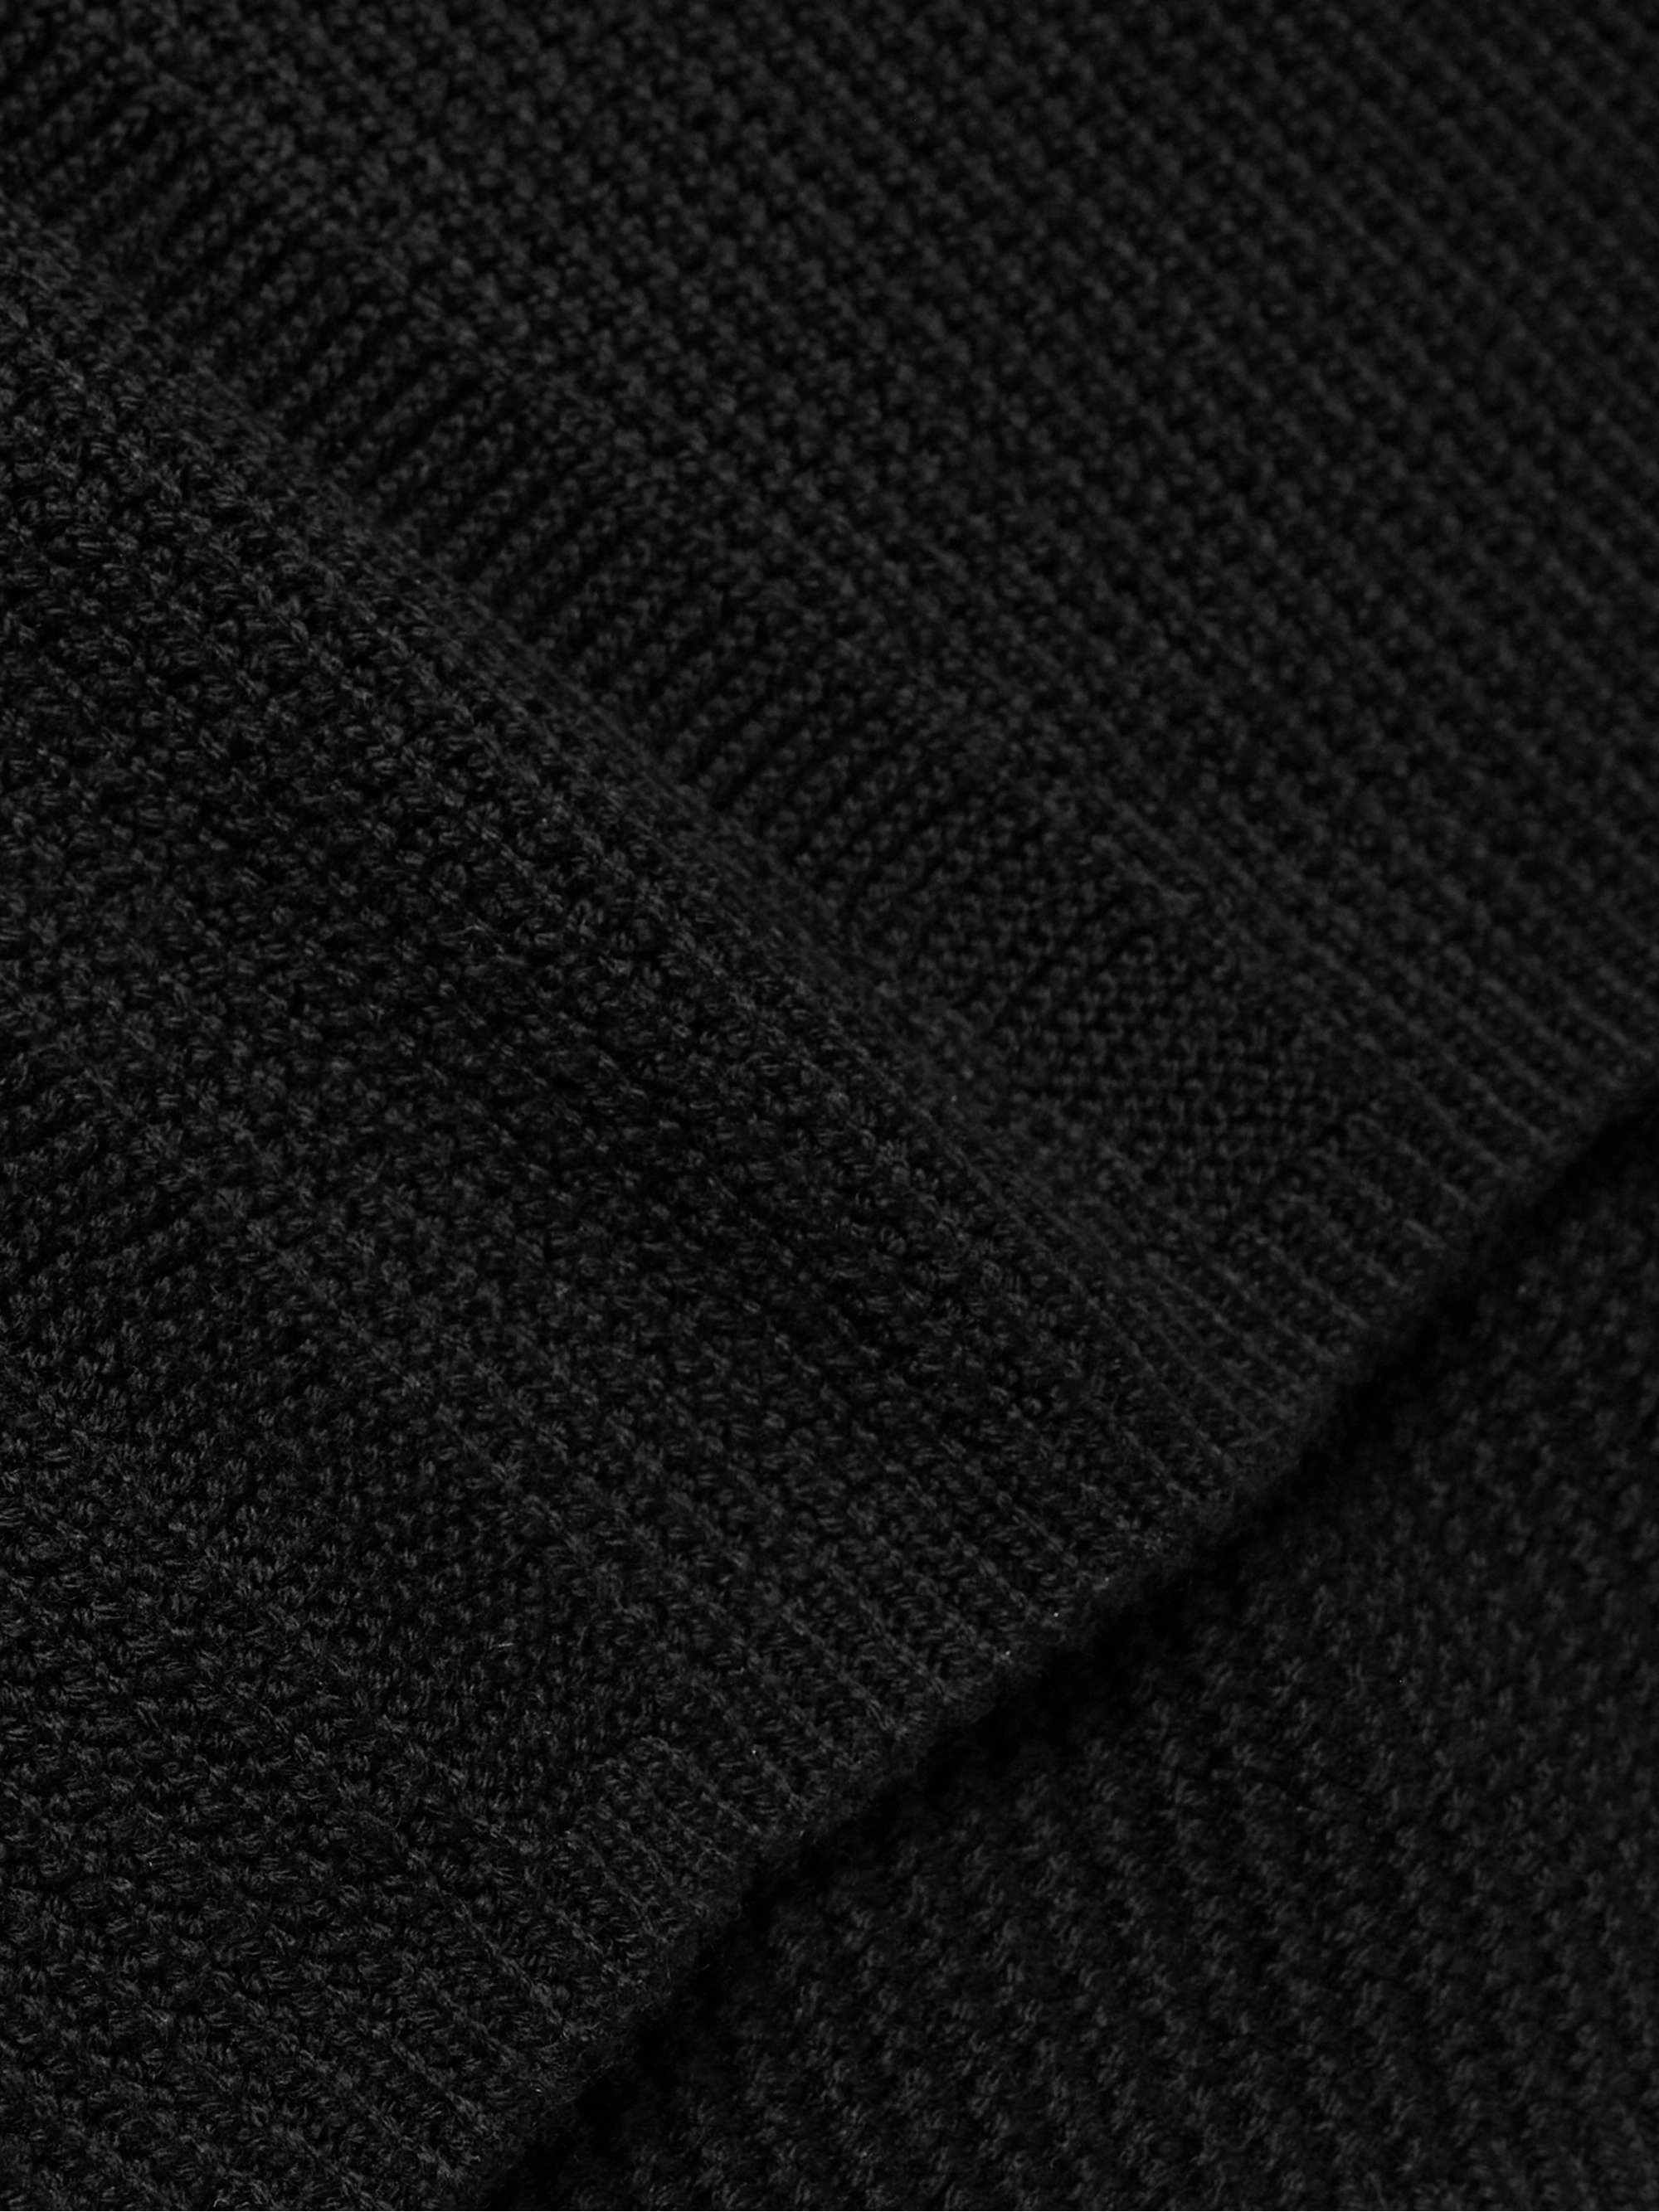 THEORY Ribbed Merino Wool Sweater for Men | MR PORTER